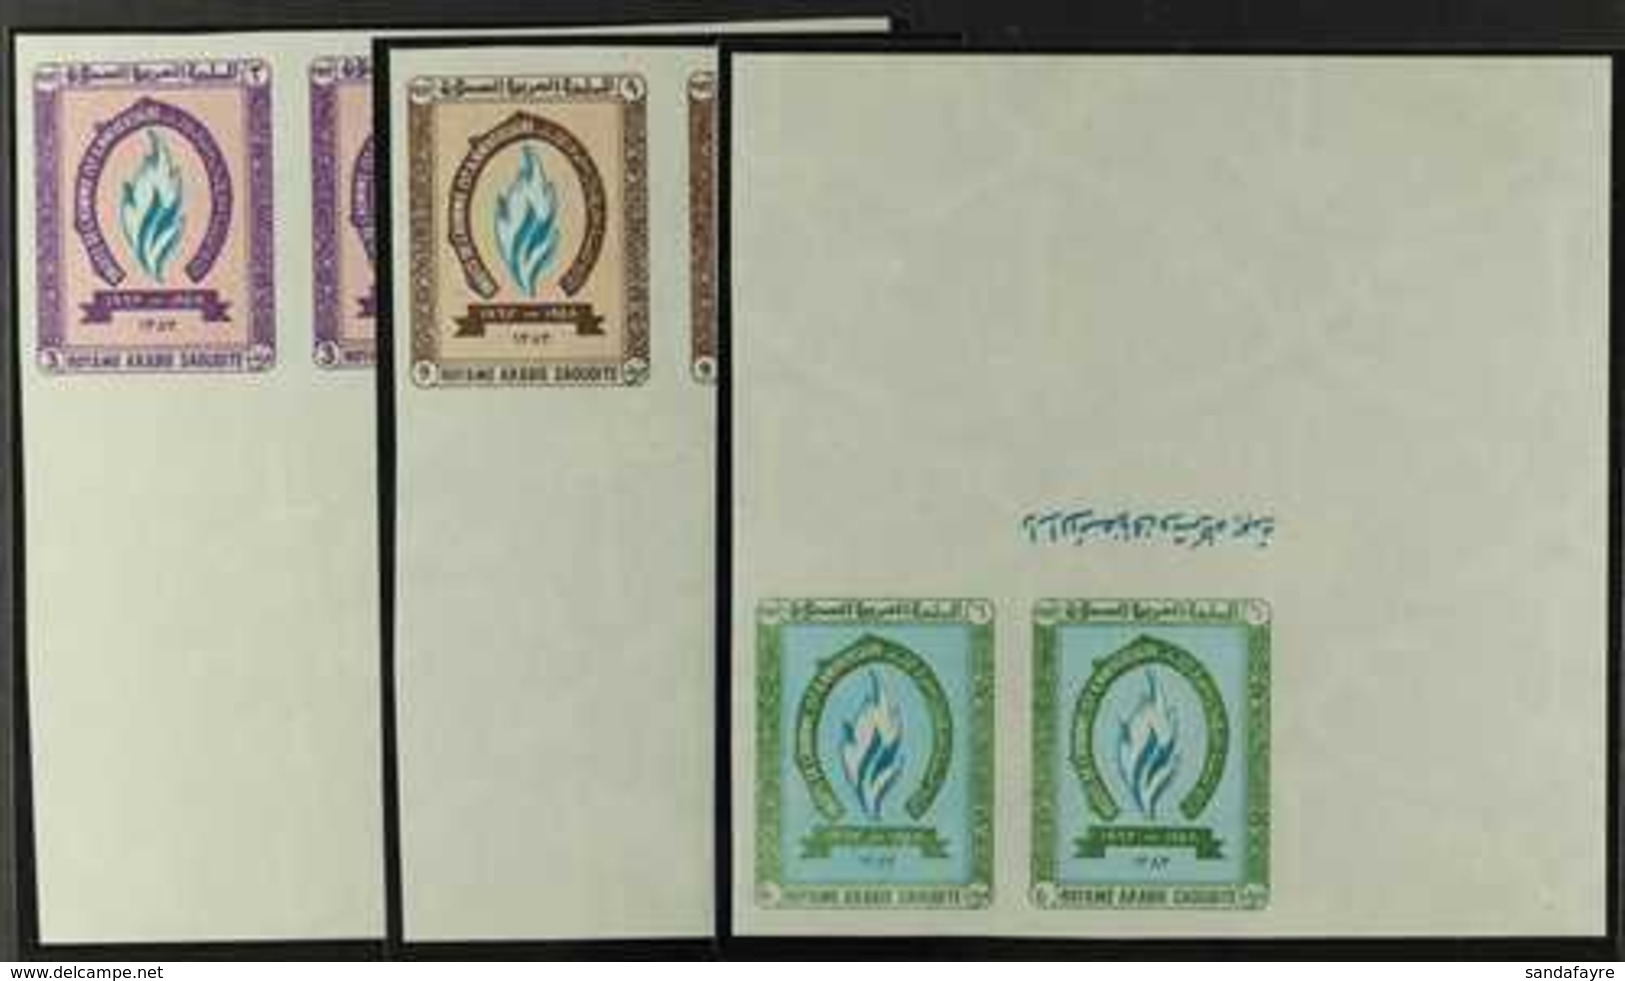 1964 15th Anniv Of Declaration Of Human Rights, SG 493/5var, Variety "IMPERF" As Superb Never Hinged Mint Marginal Pairs - Arabia Saudita